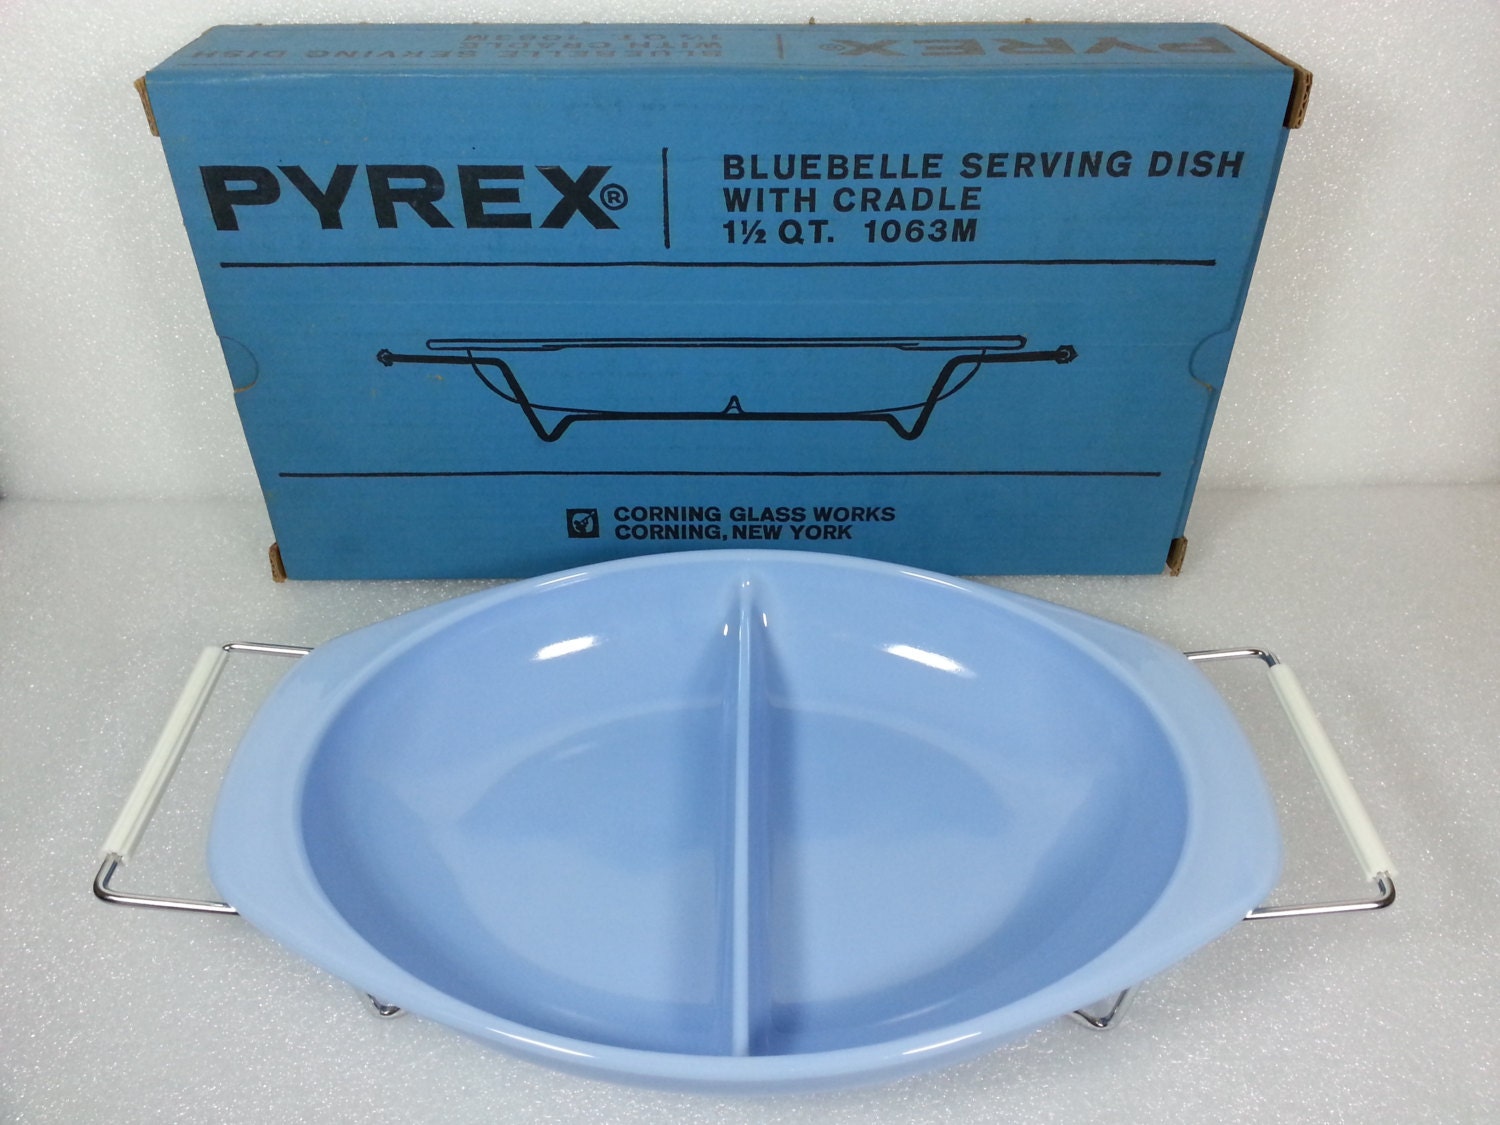 Vintage Pyrex Delphite Blue Oval Divided Dish WITH 2 Handled Stand In Box - MINT